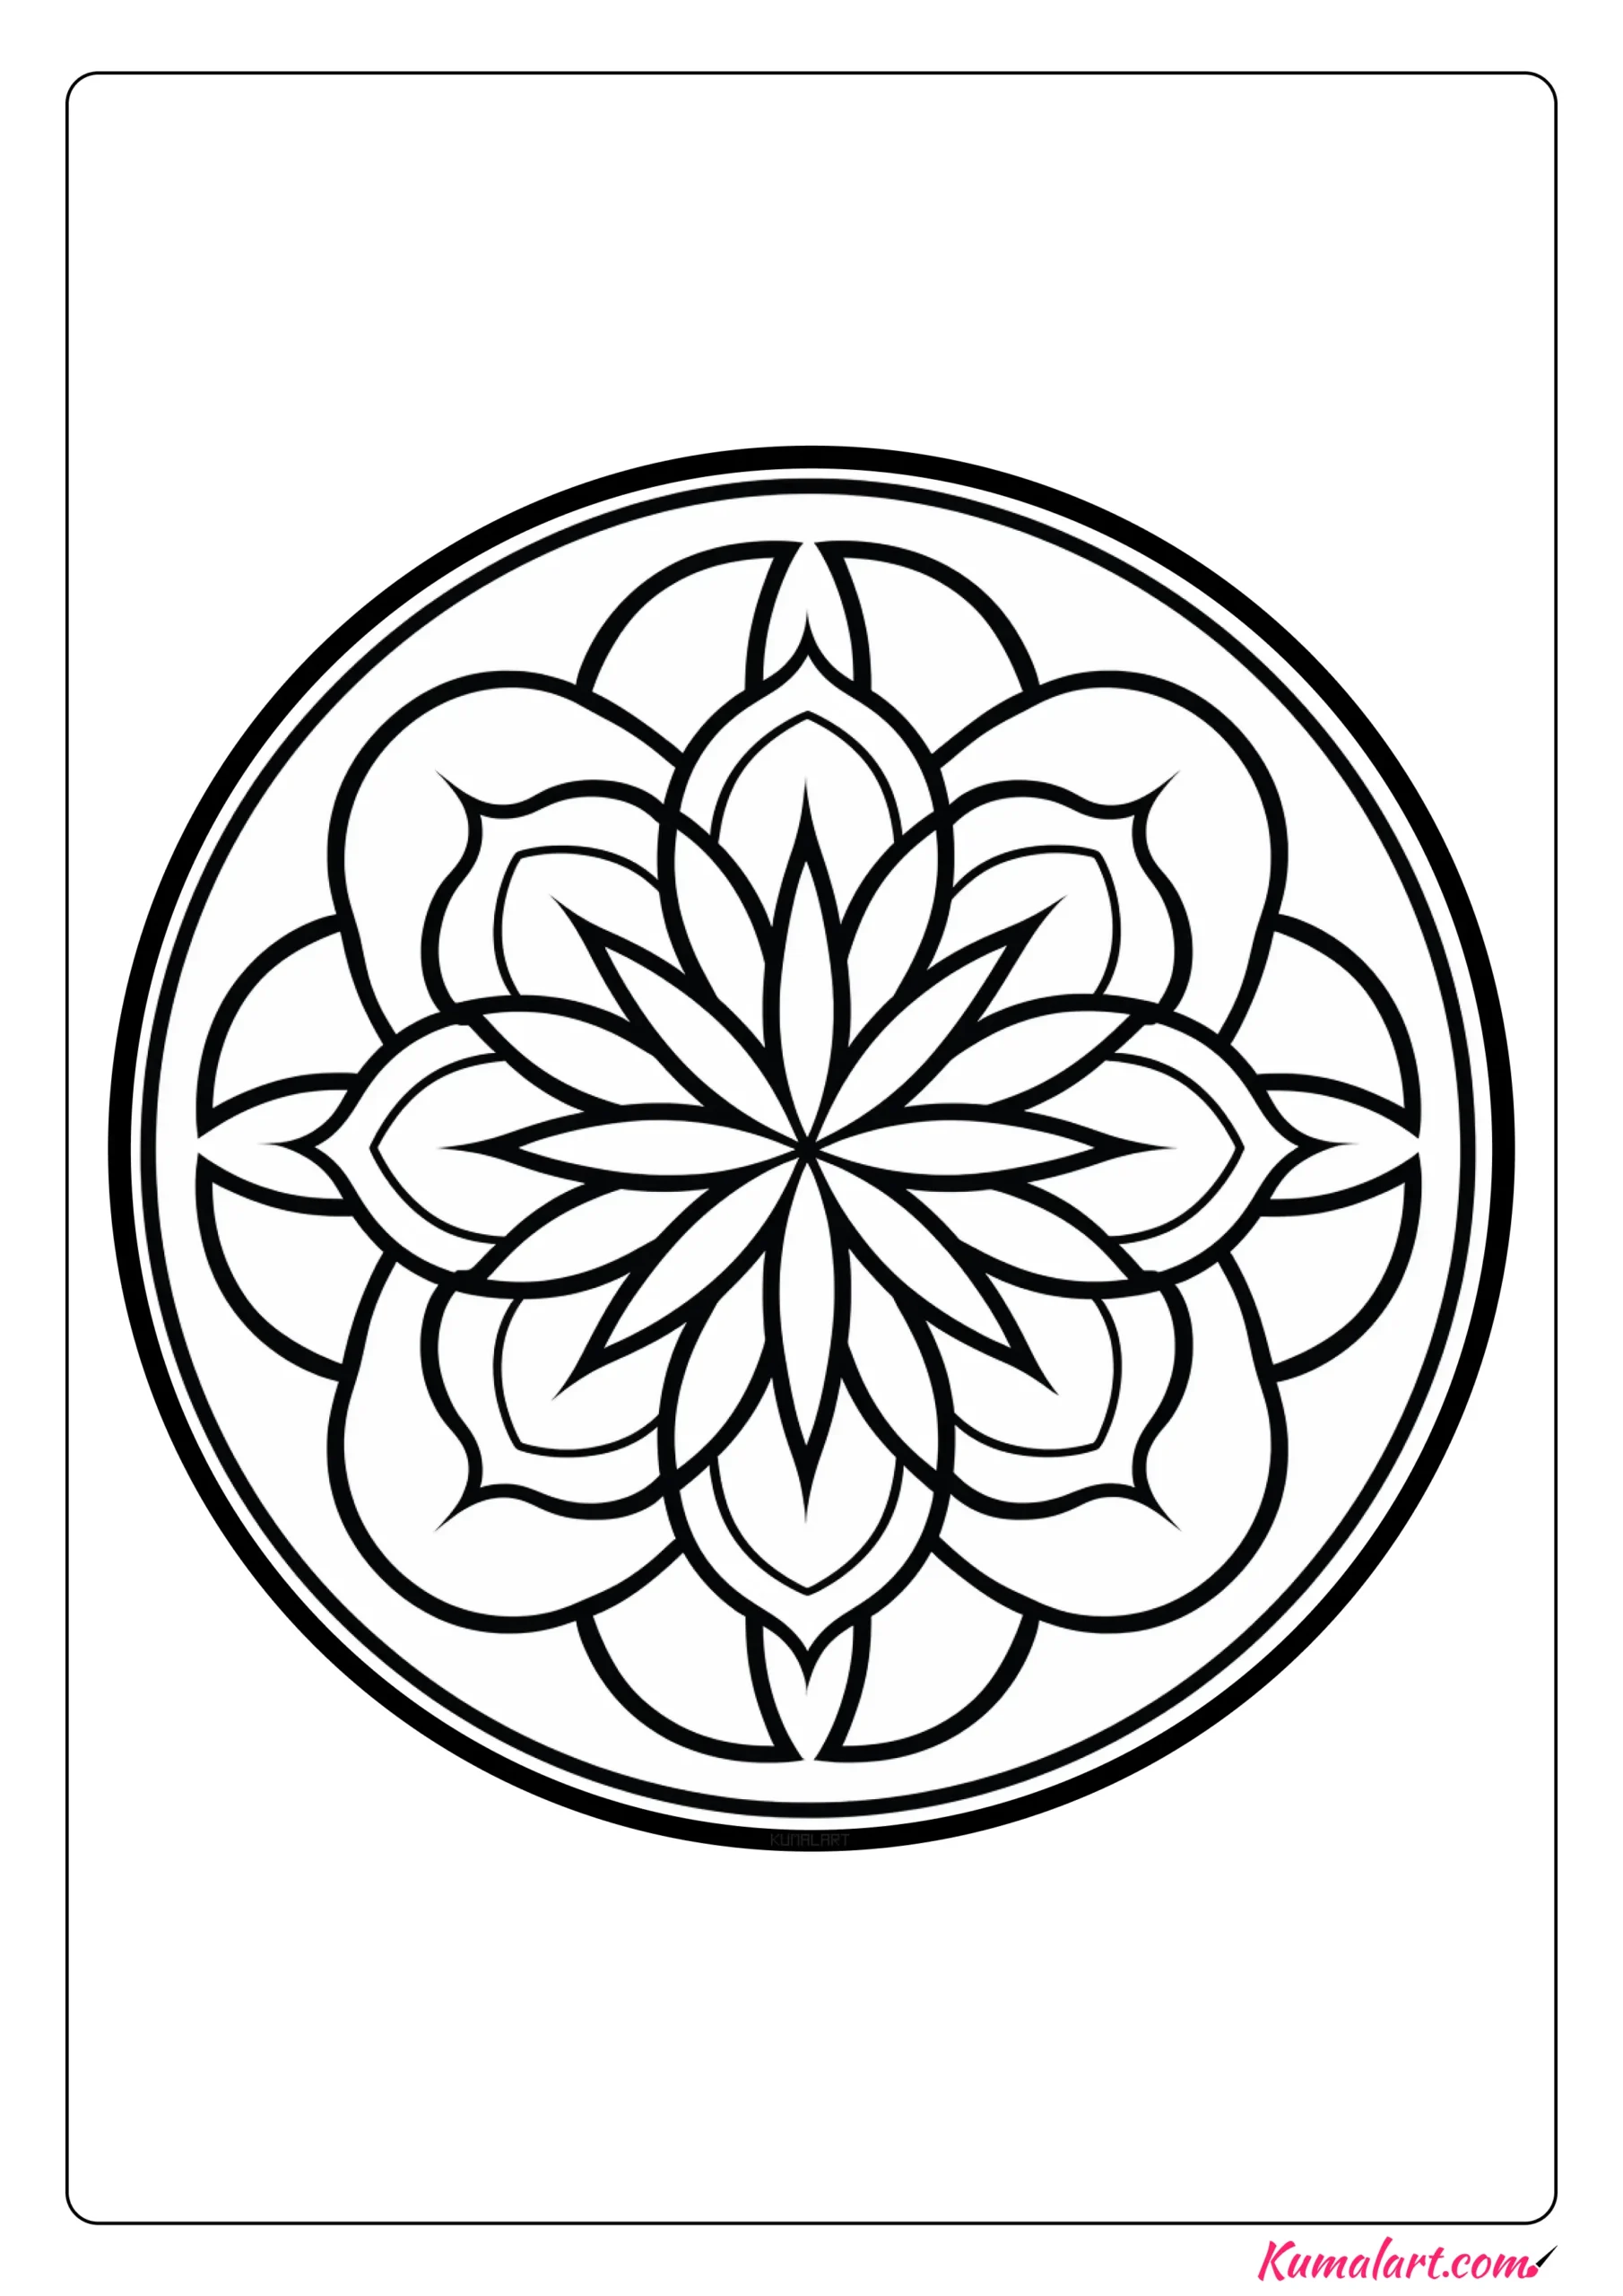 Abstract Flower Mandala Coloring Page